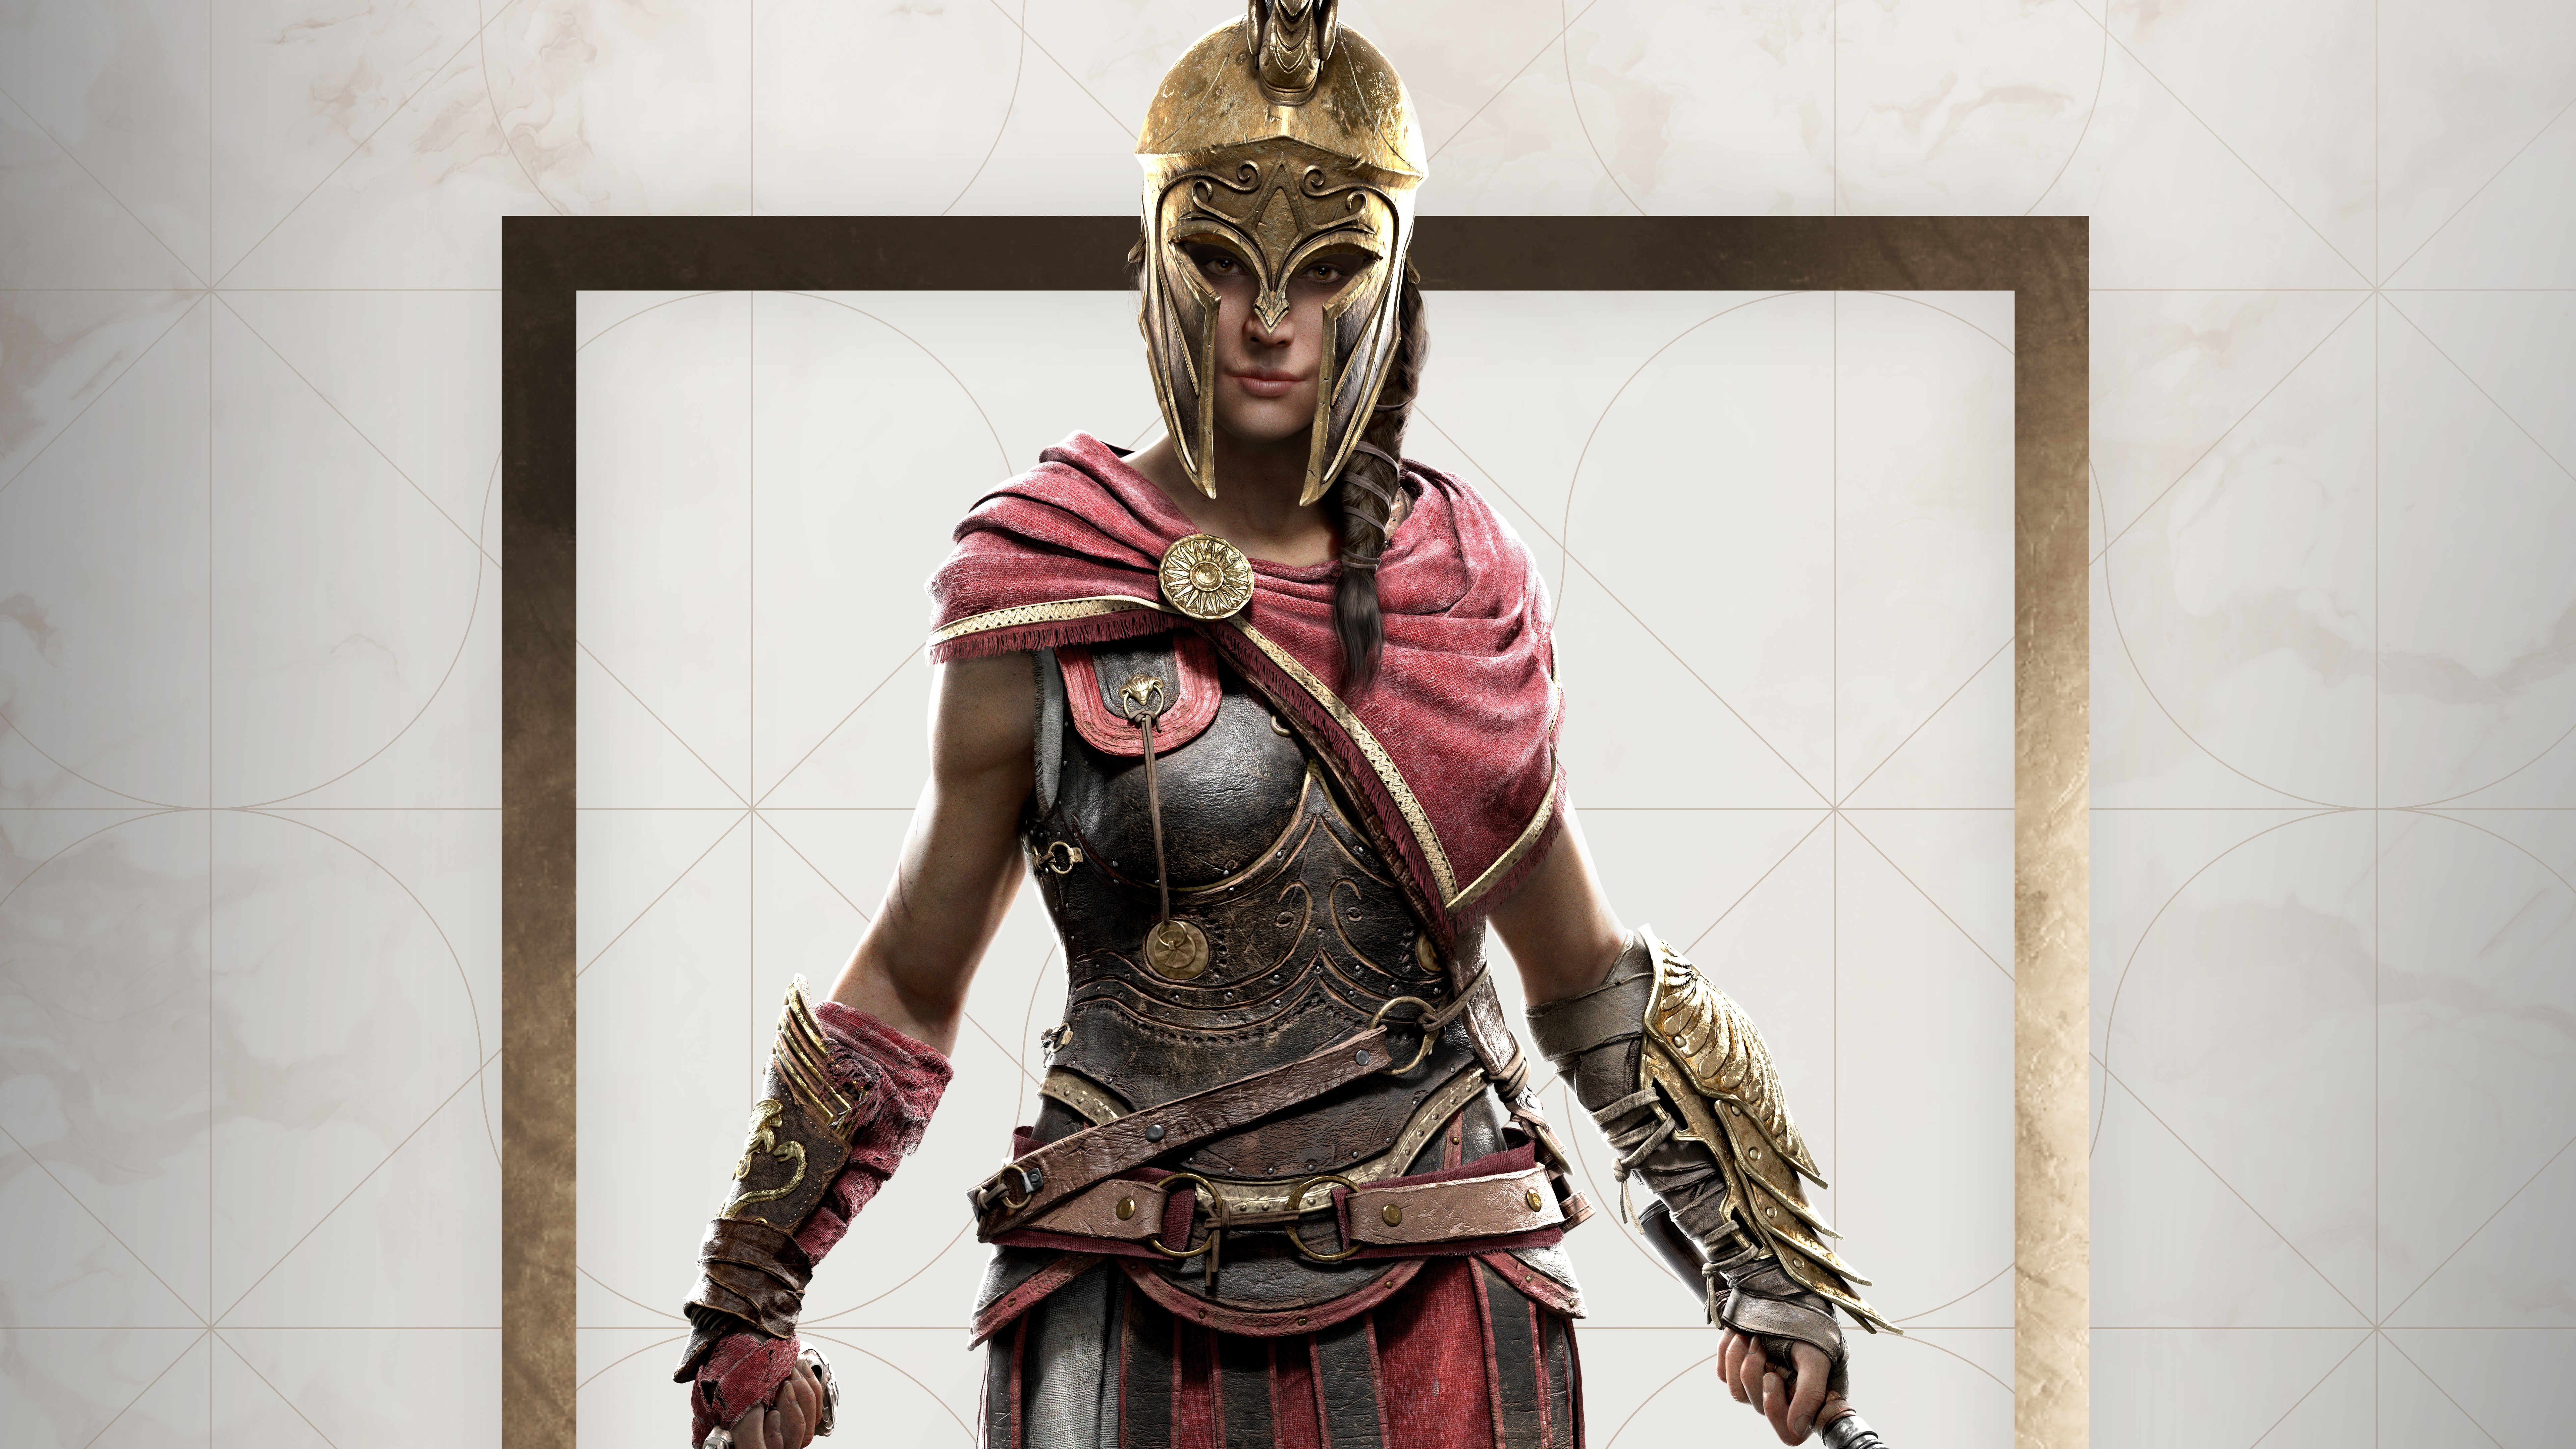 General 7680x4320 Assassin's Creed Assassin's Creed: Odyssey Assassins Creed: Odyssey Kassandra soldier ancient greece ancient Greek Mythological Ubisoft video games video game characters